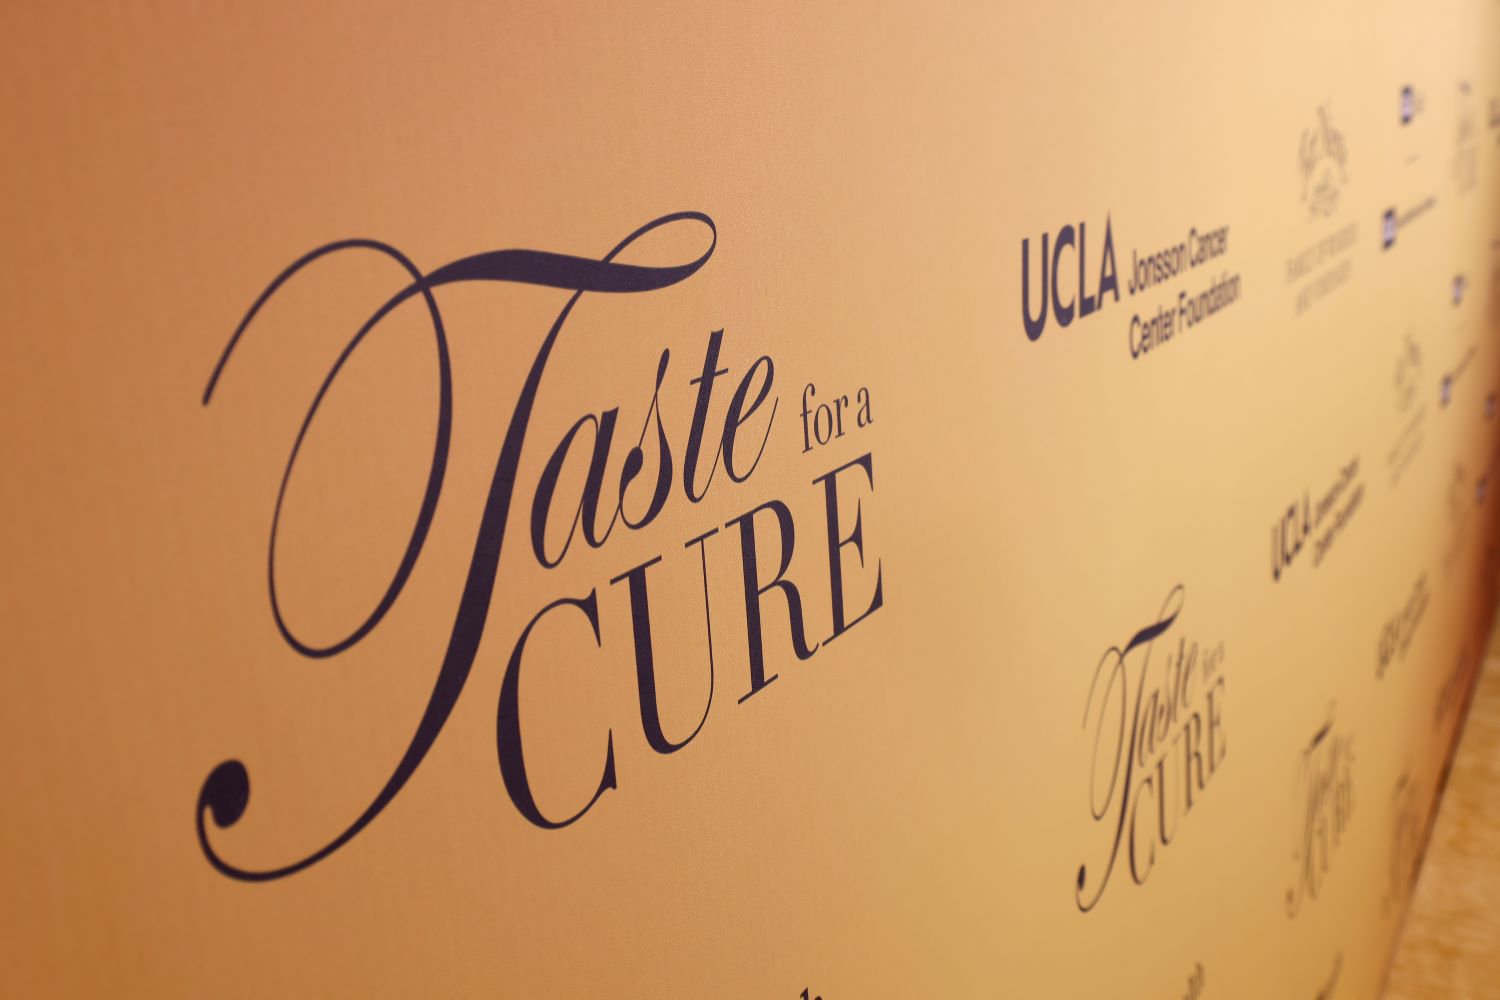 An image of the Taste for a Cure banner. 